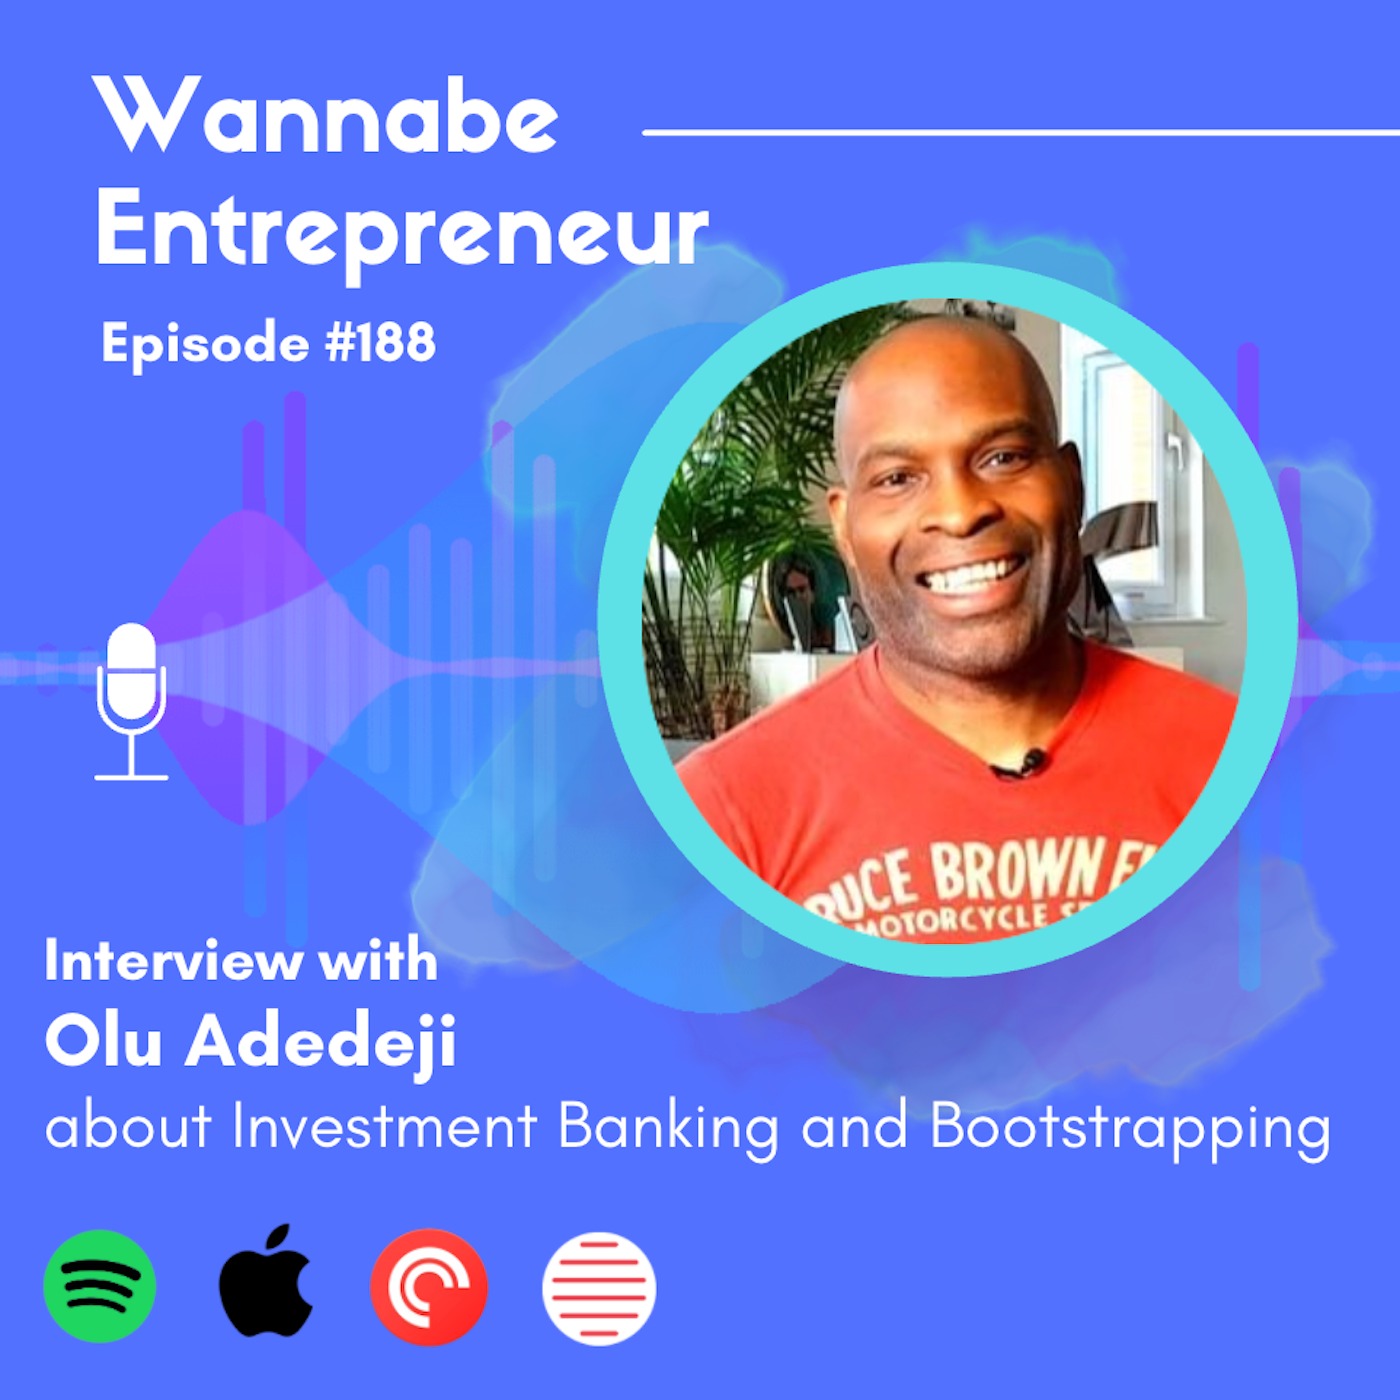 Interviewing Olu about Investment Banking and Bootstrapping